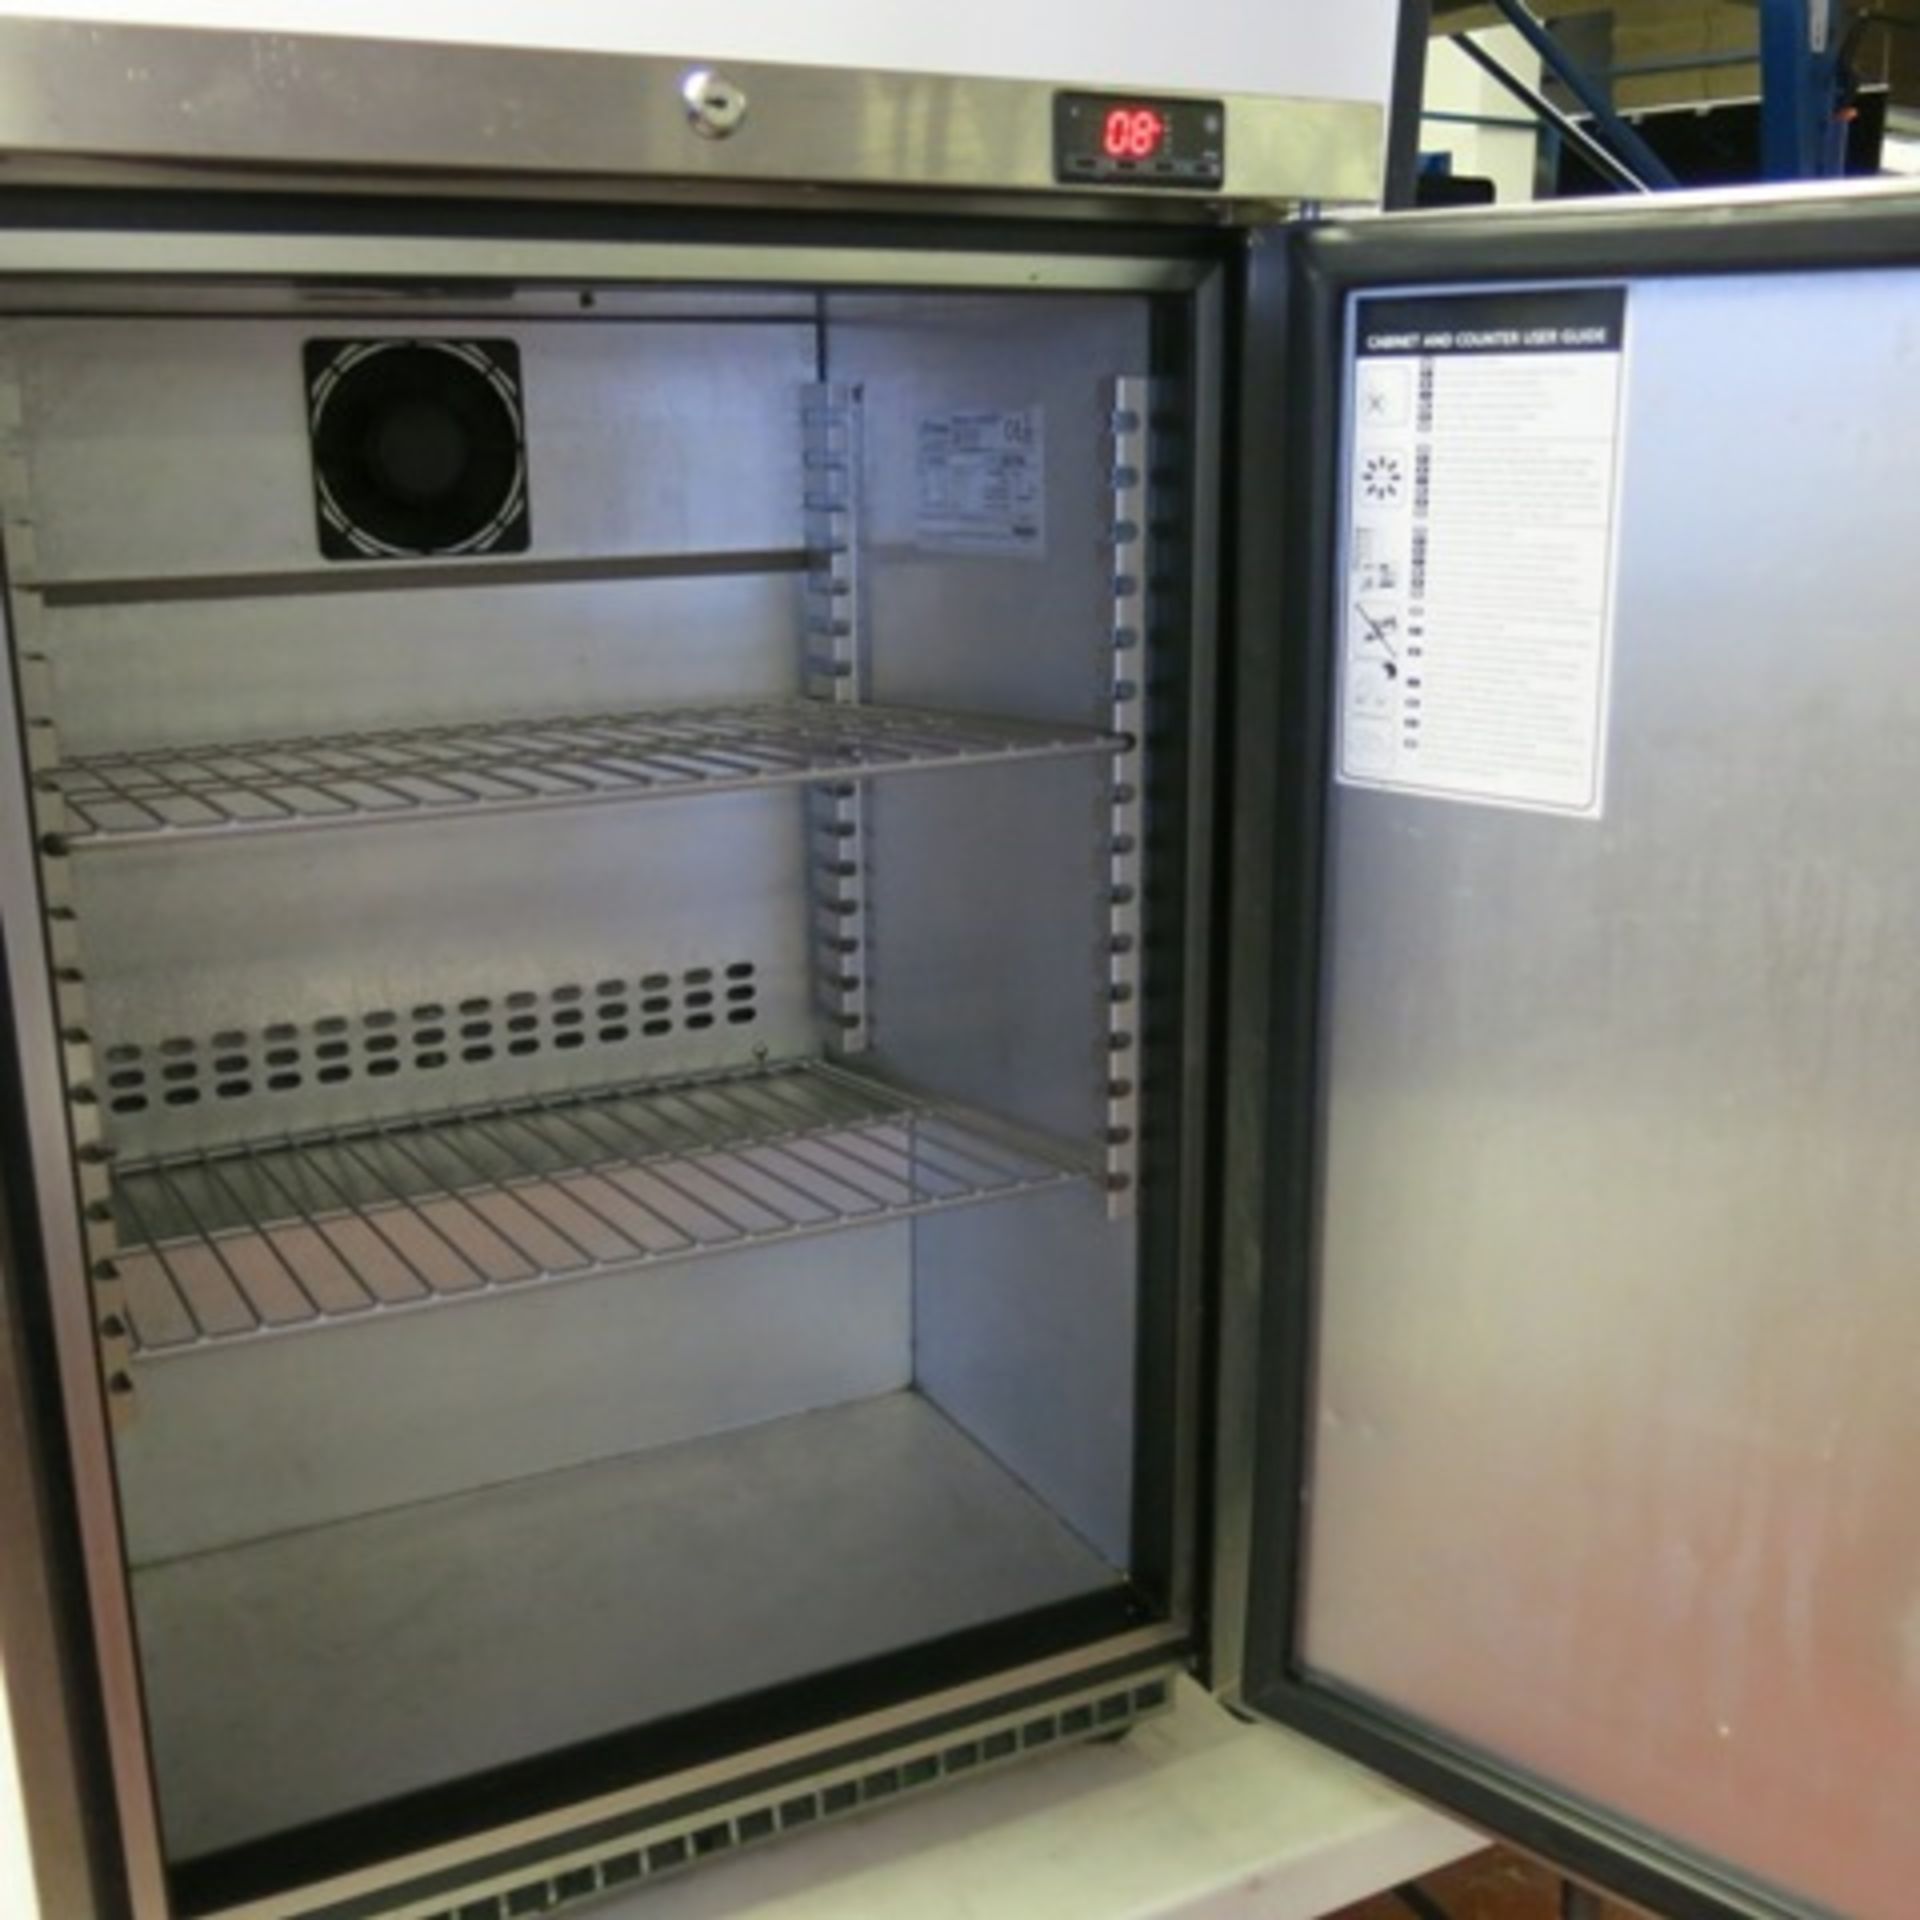 Foster Undercounter Stainless Steel Fridge, Model HR150-A - Image 3 of 5